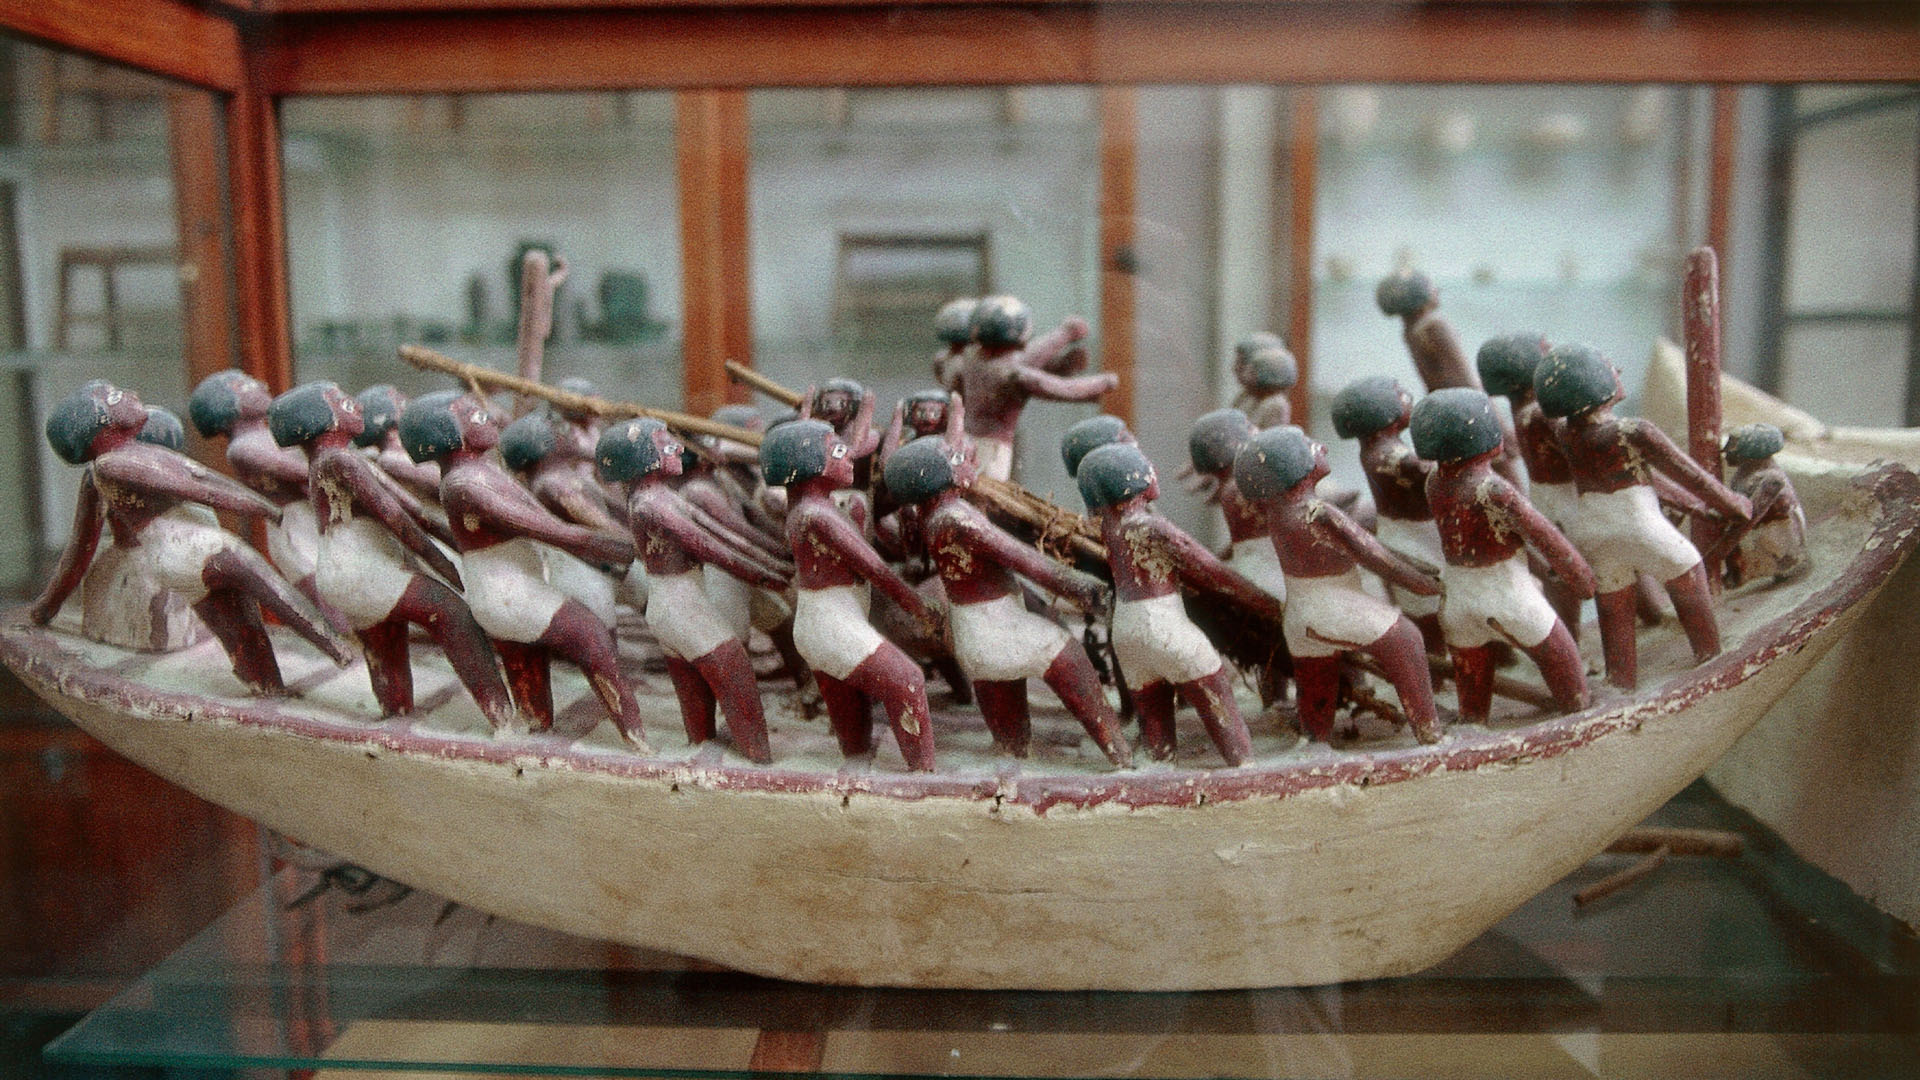 Scale model of a boat from the Tomb of Meketre.